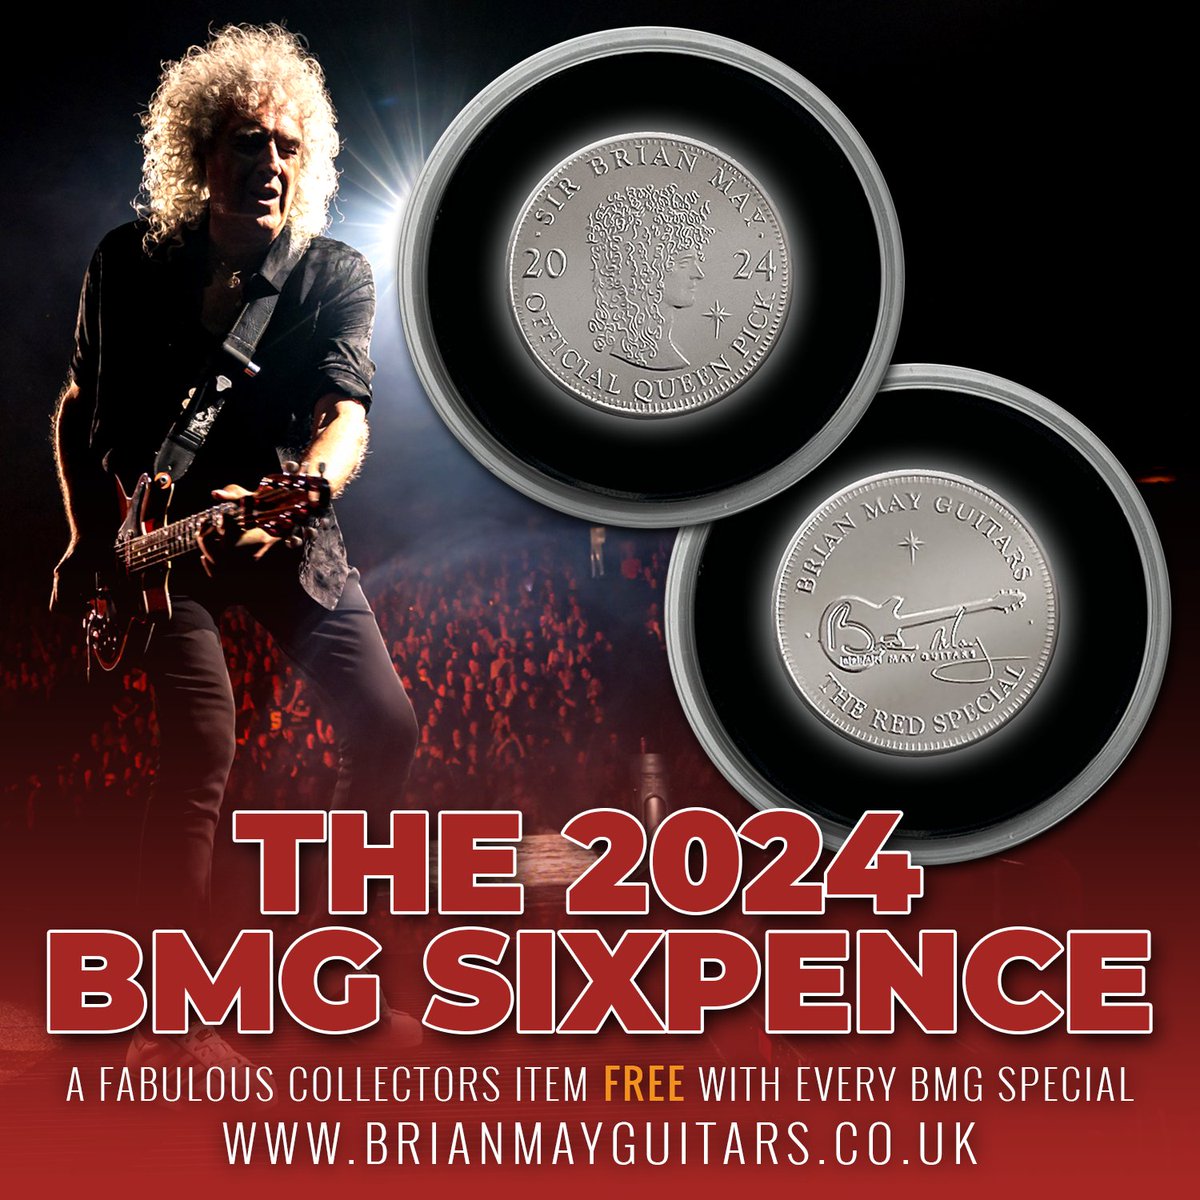 Coinciding with the 60th anniversary of the completion of @DrBrianMay's Red Special, and 20 glorious years since the launch of @BrianMayGuitars, every new BMG Special now ships complete with a fabulous FREE 2024 OFFICIAL SIXPENCE COIN Offer exclusive to BrianMayGuitars.co.uk